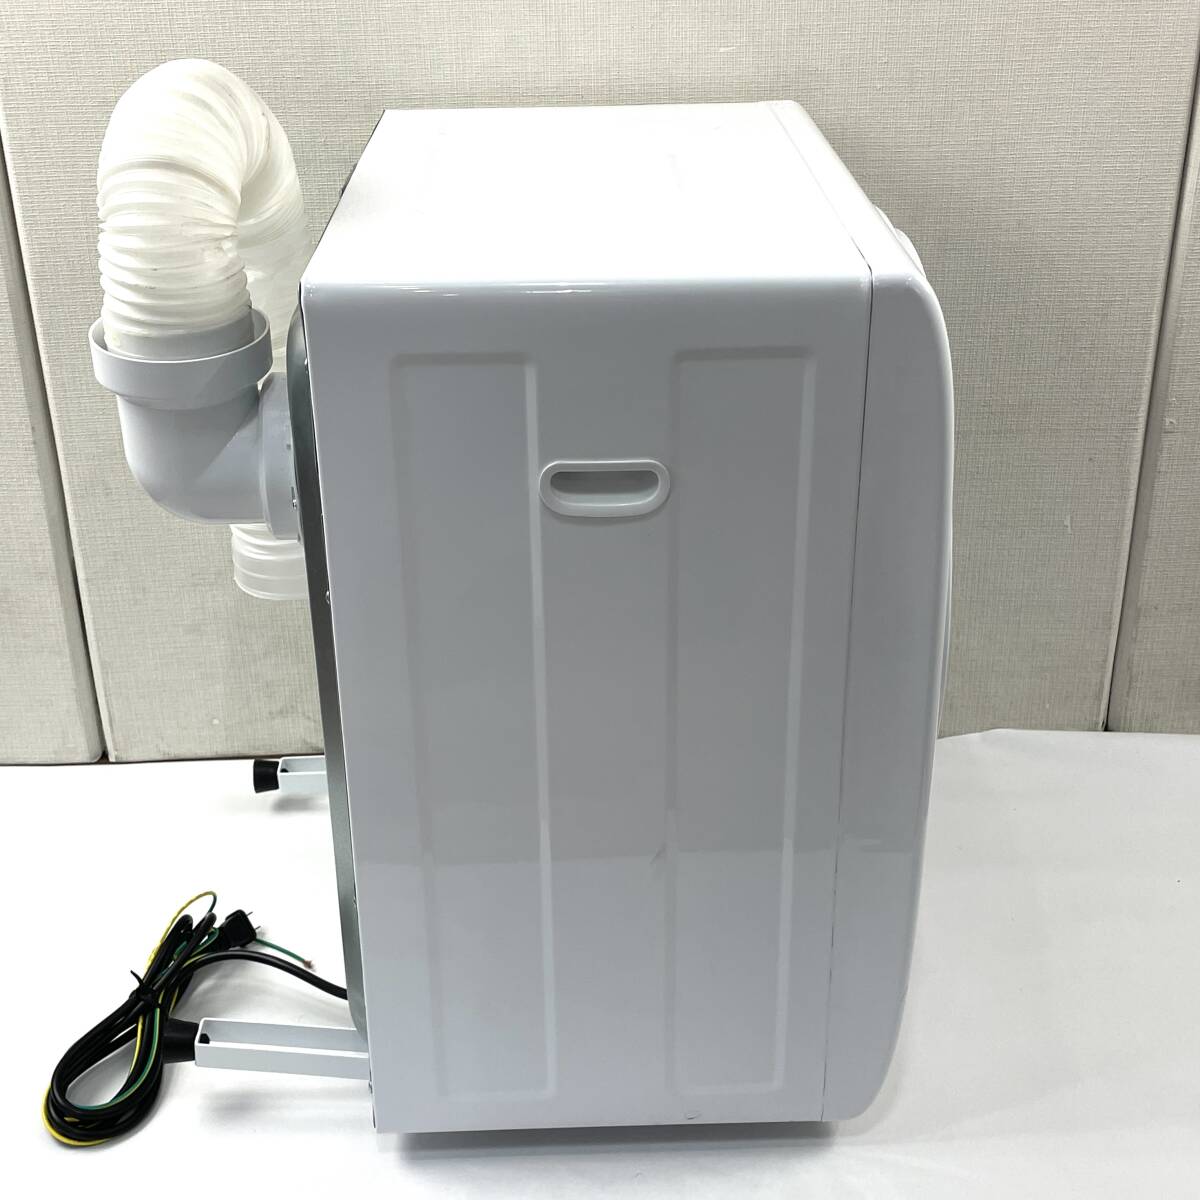 K\'s WAVE small size dryer My Wave Warm Dryer 3.0 K'S wave 24D north TO3